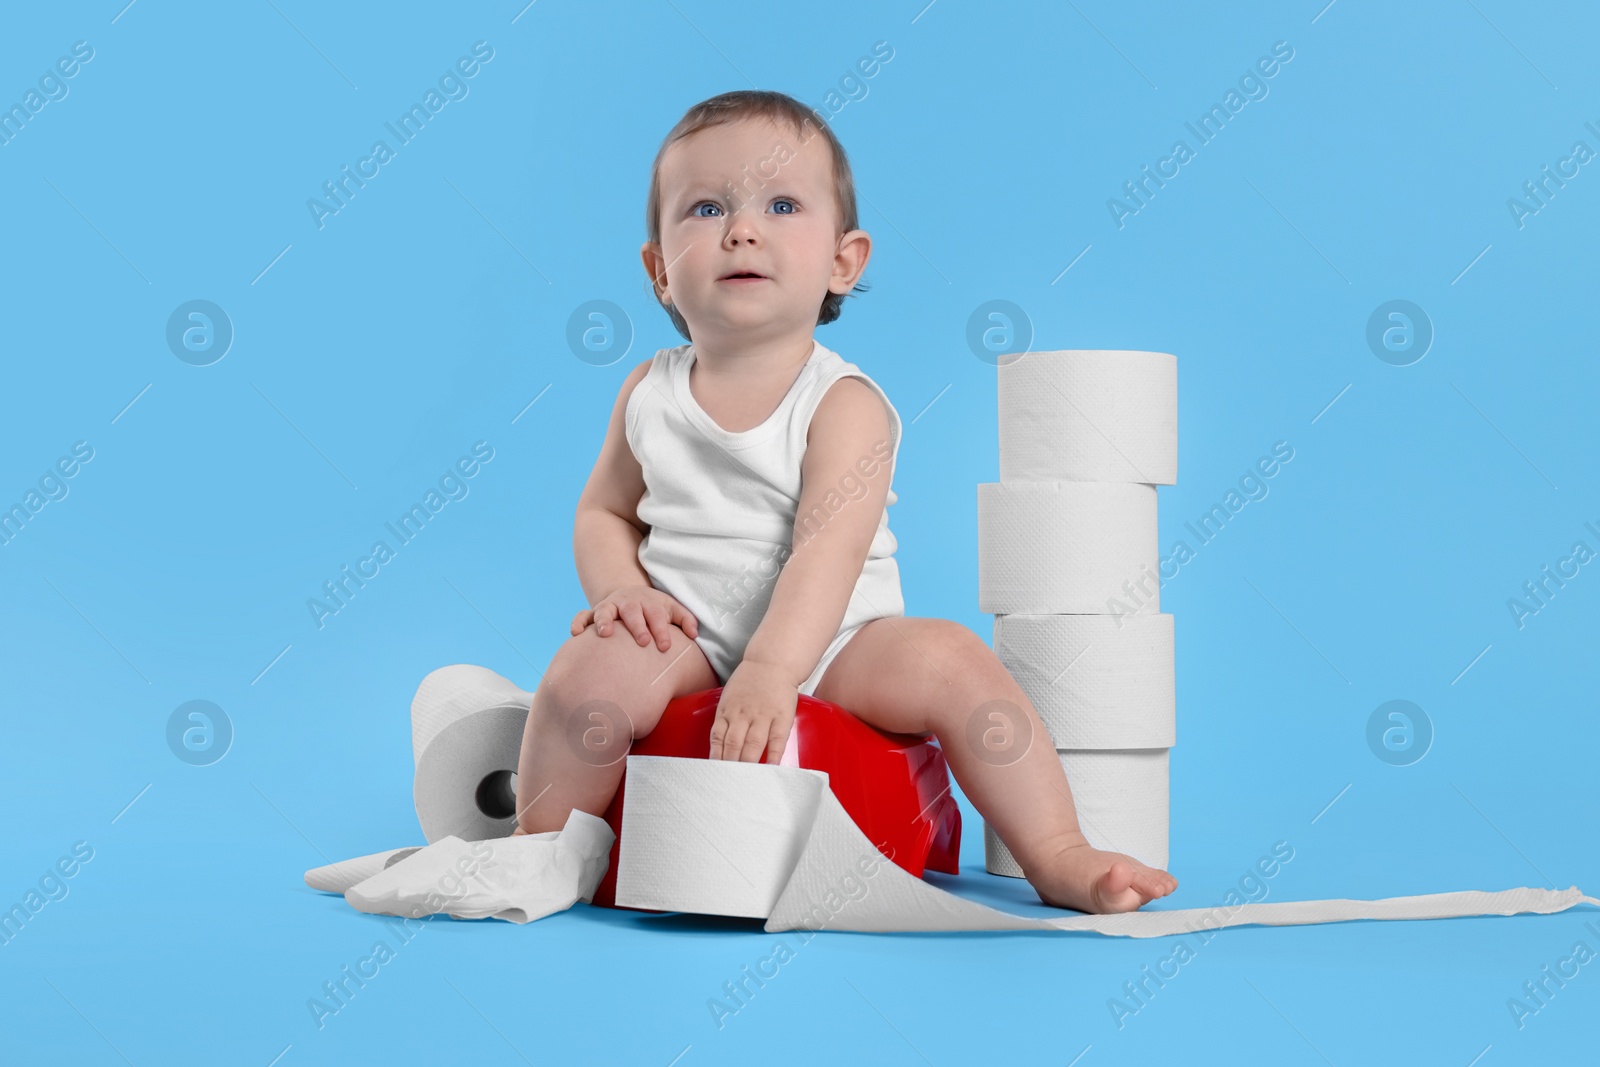 Photo of Little child sitting on baby potty and stack of toilet paper rolls against light blue background